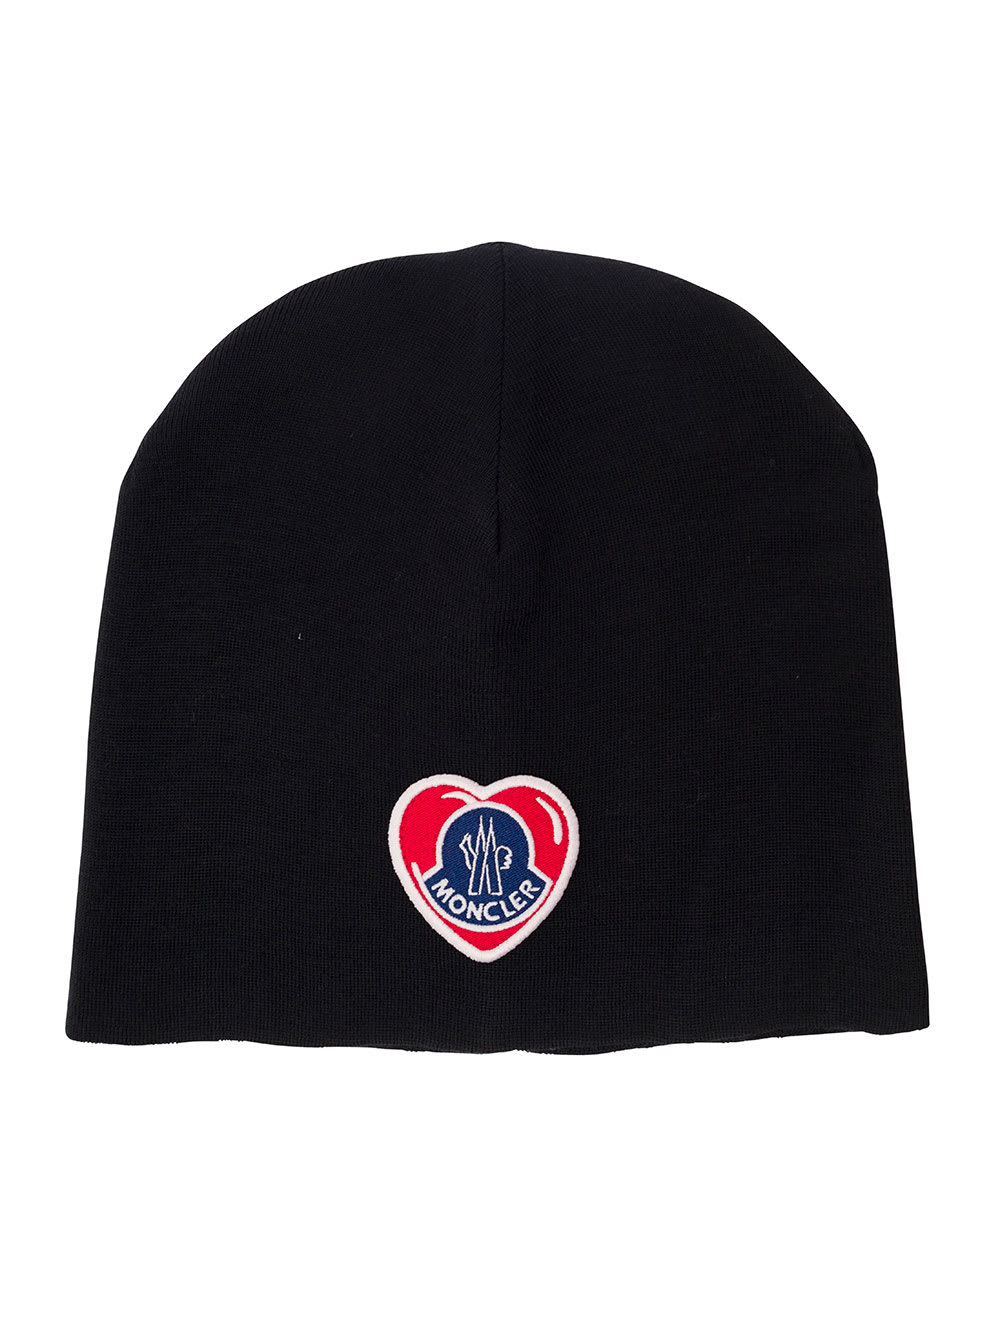 Black Beanie With Heart-shaped Logo Patch In Wool Blend Man